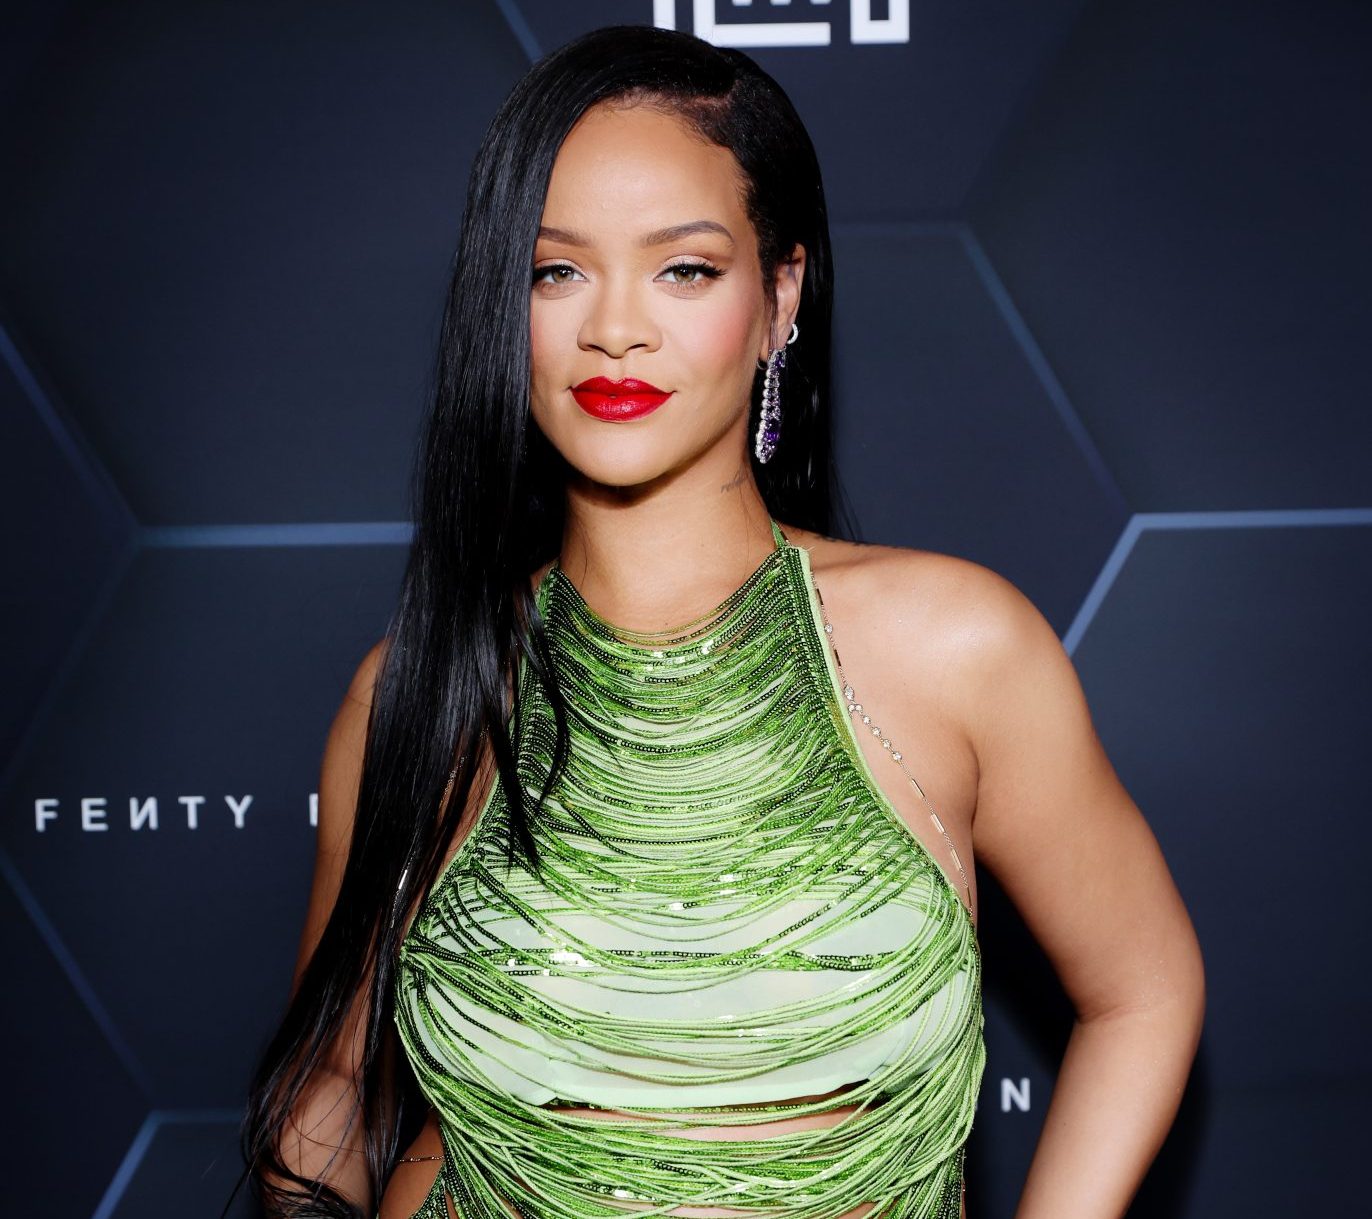 Rihanna Is Now The Youngest Self-Made Billionaire In America